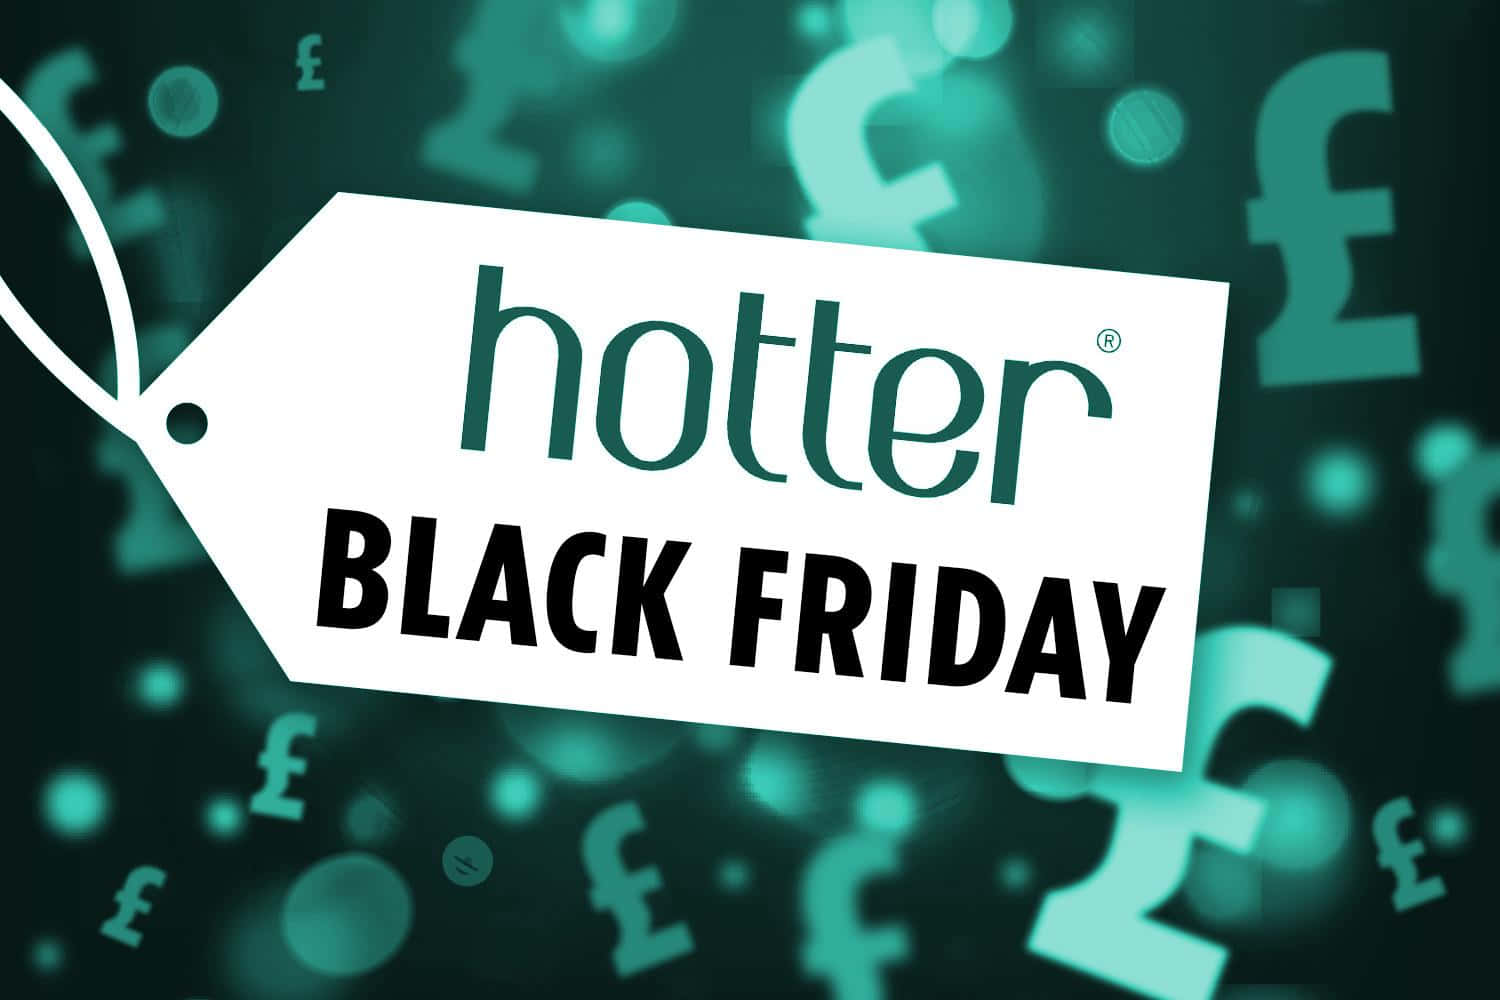 A Black Friday Tag With The Words Hotter Black Friday